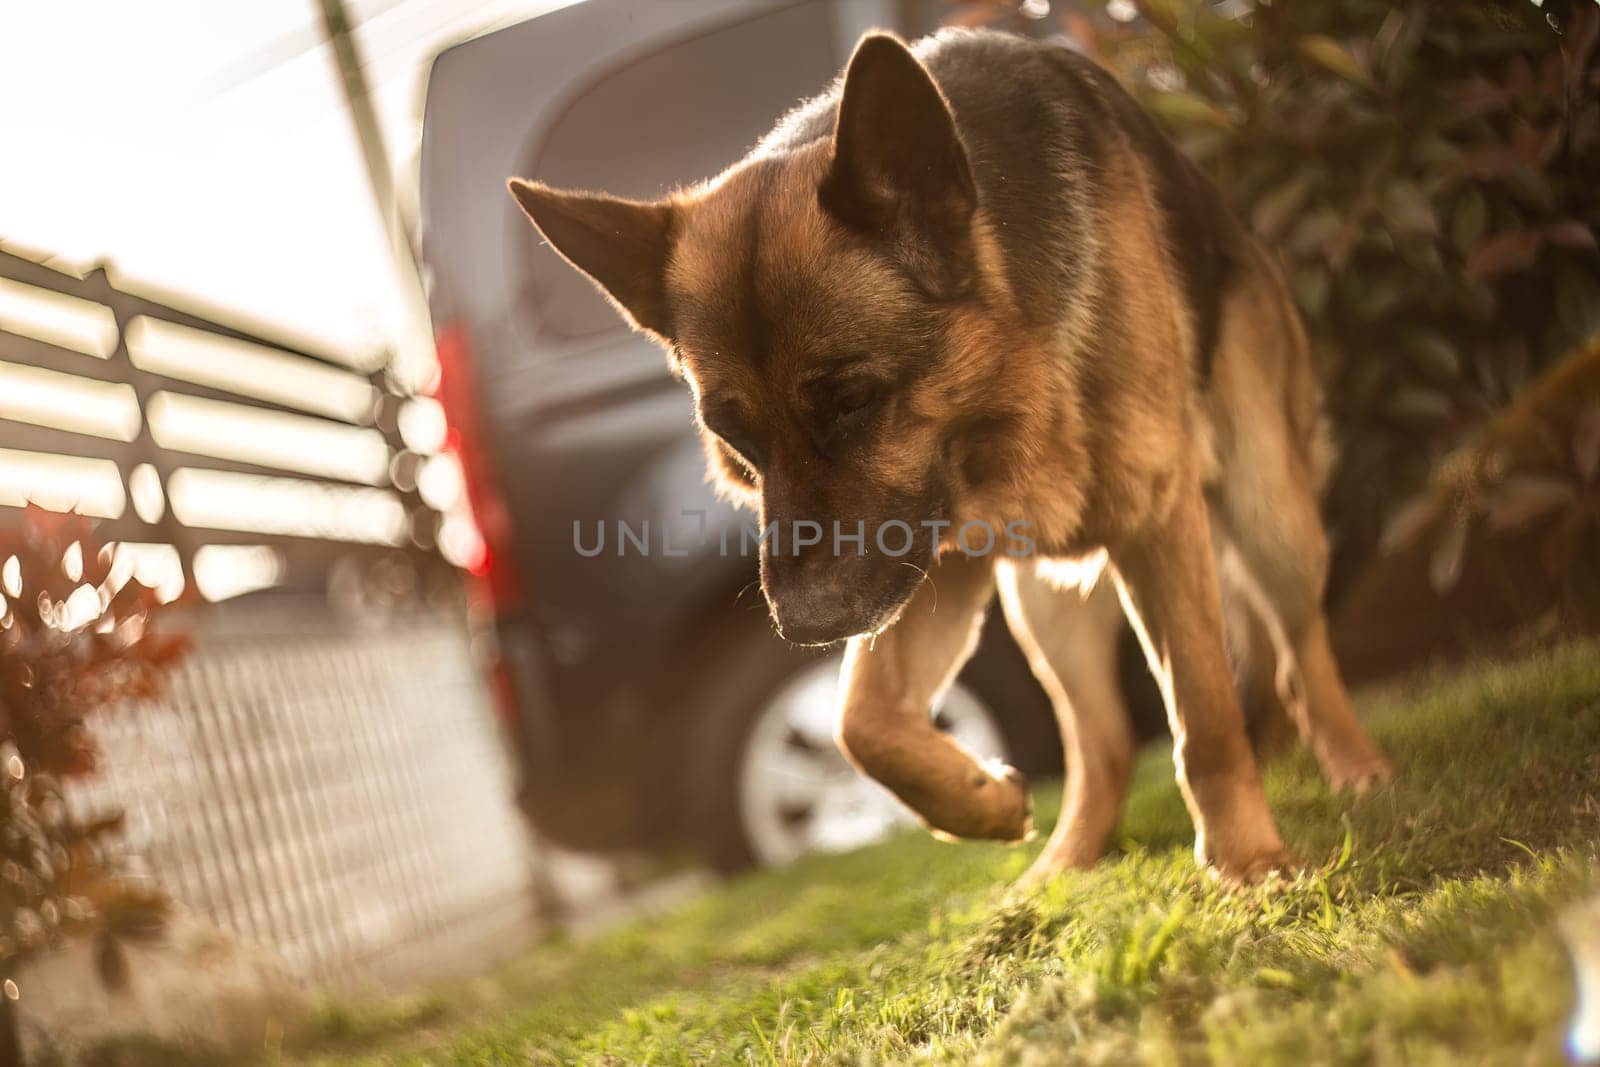 Adorable German Shepherd playing in the garden at sunset with golden sunlight bathing the scene.